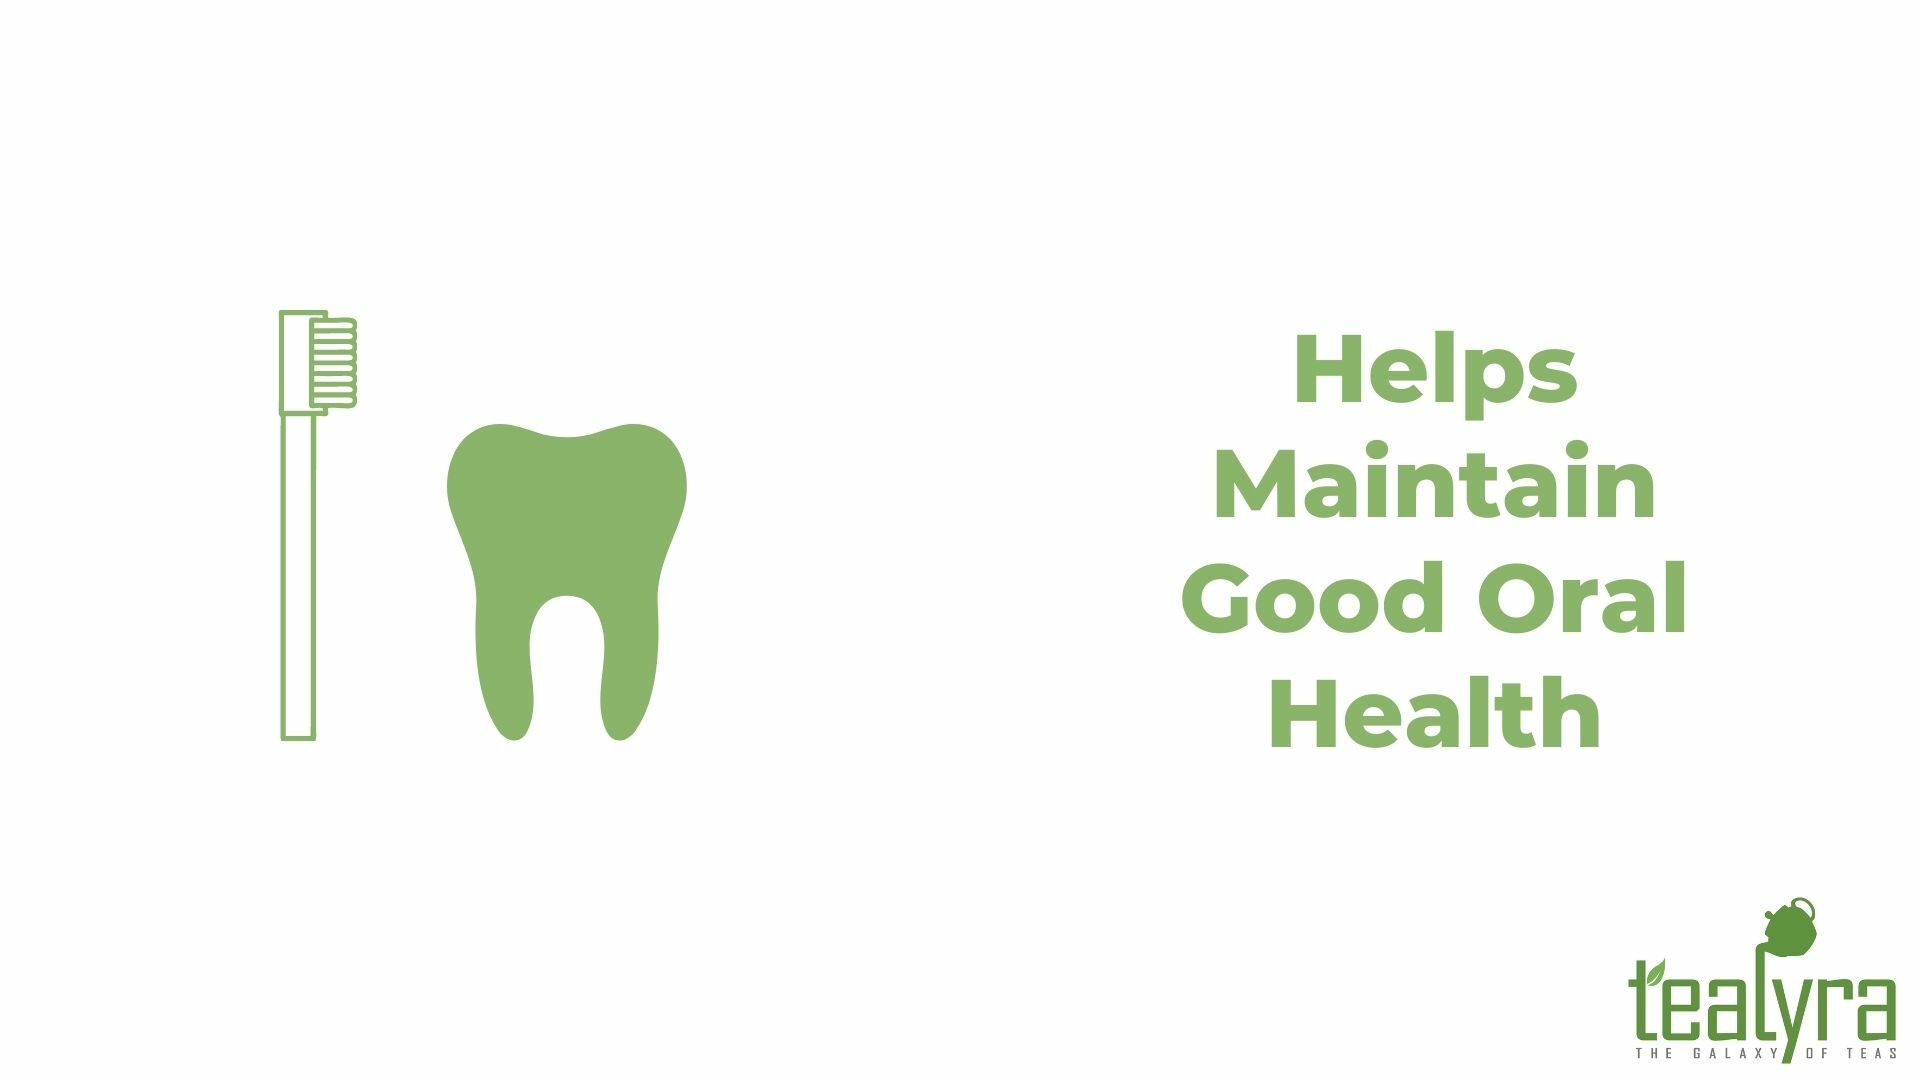 image-Helps-Maintain-Good-Oral-Health